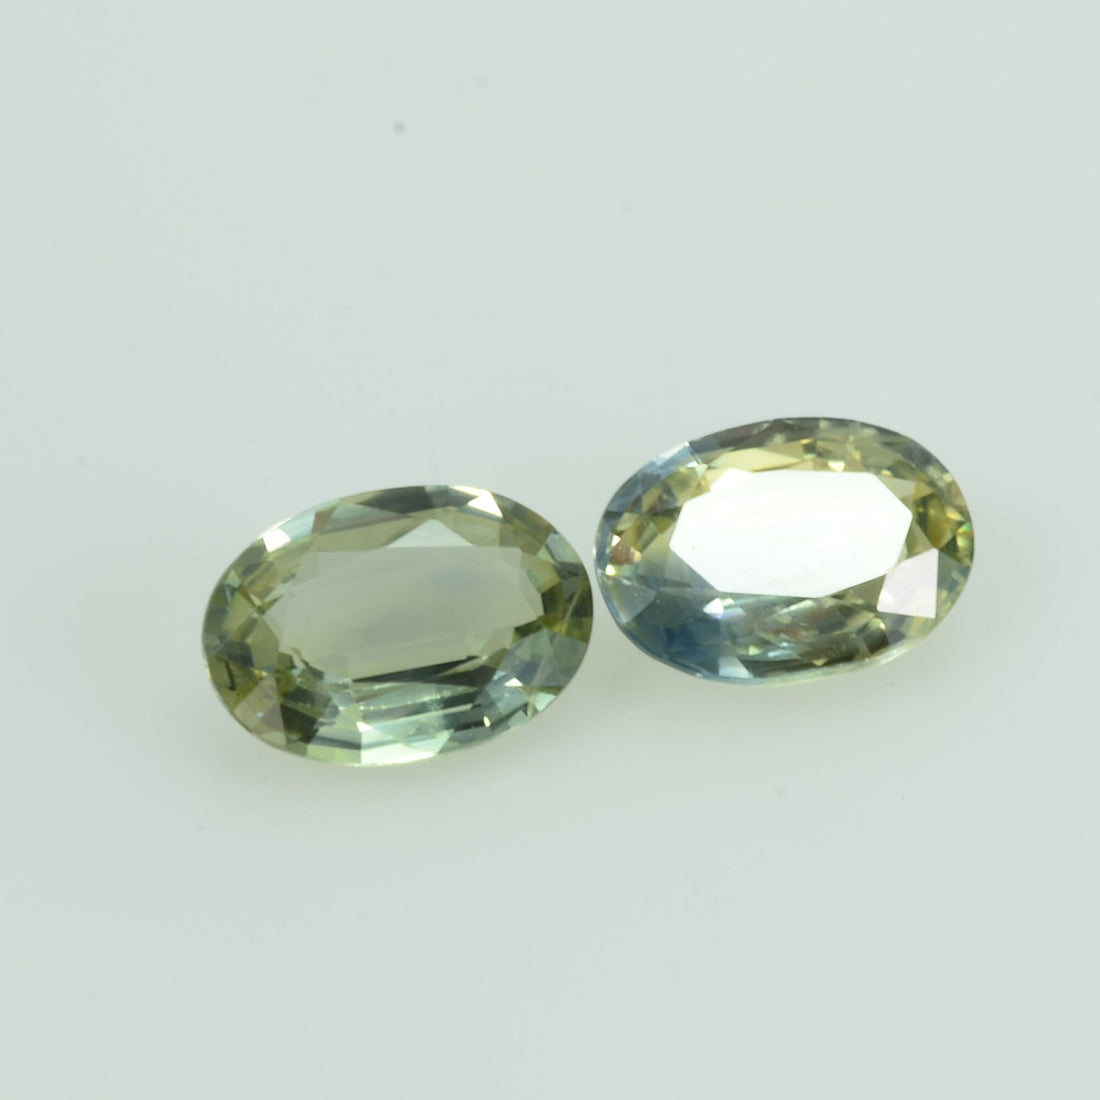 1.66 cts Natural Fancy Sapphire Loose Pair Gemstone Oval Cut